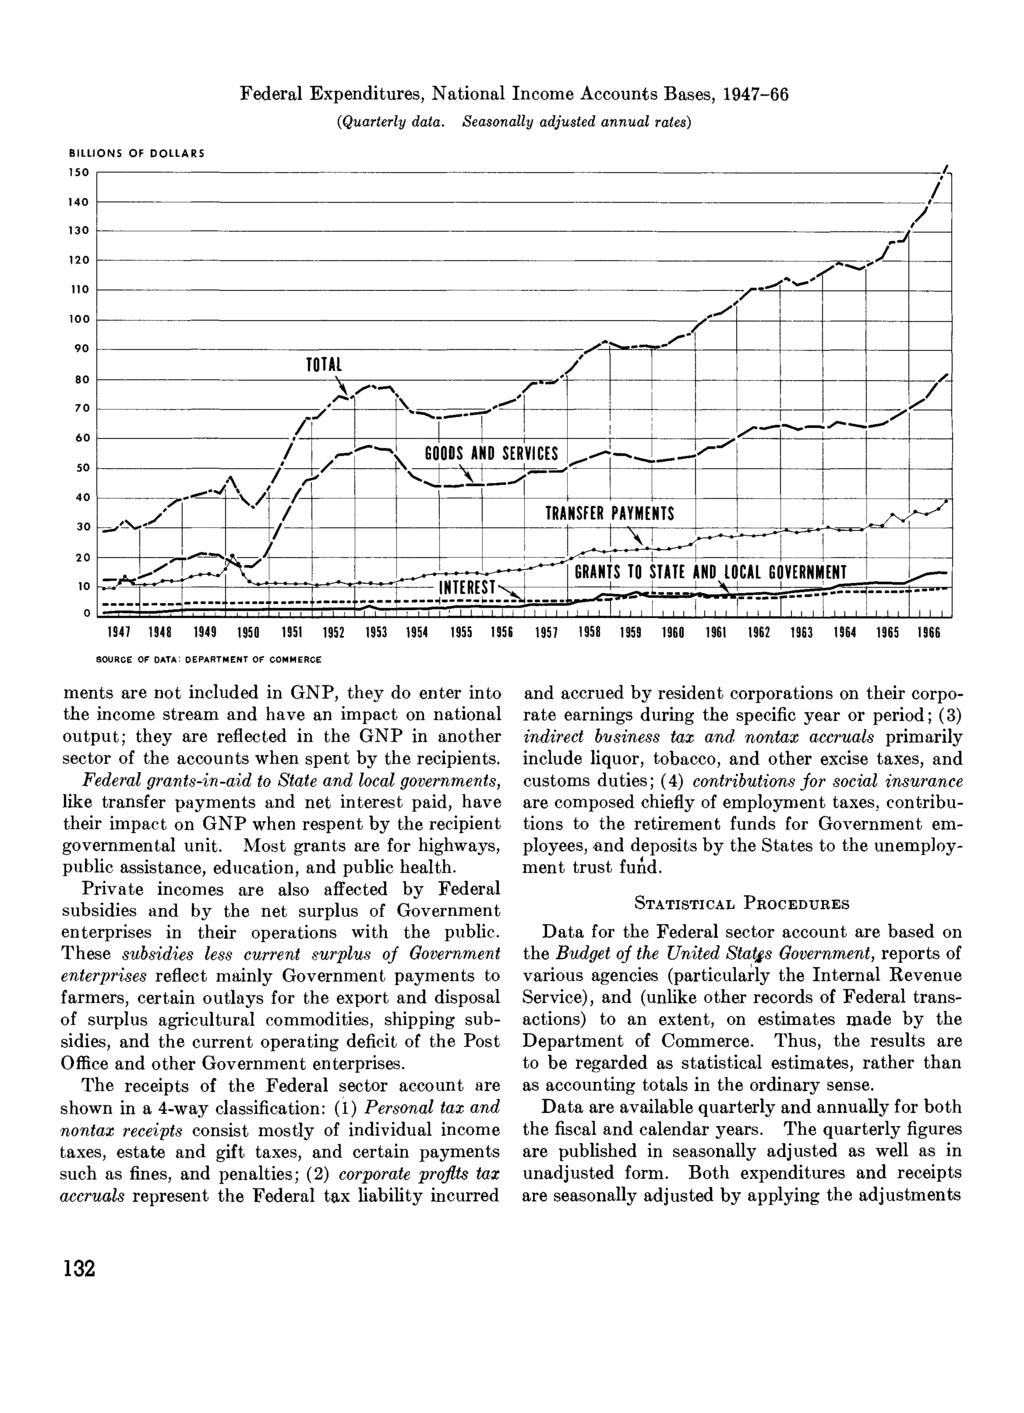 Federal Expenditures, National Income Accounts Bases, 1947-66 (Quarterly data.